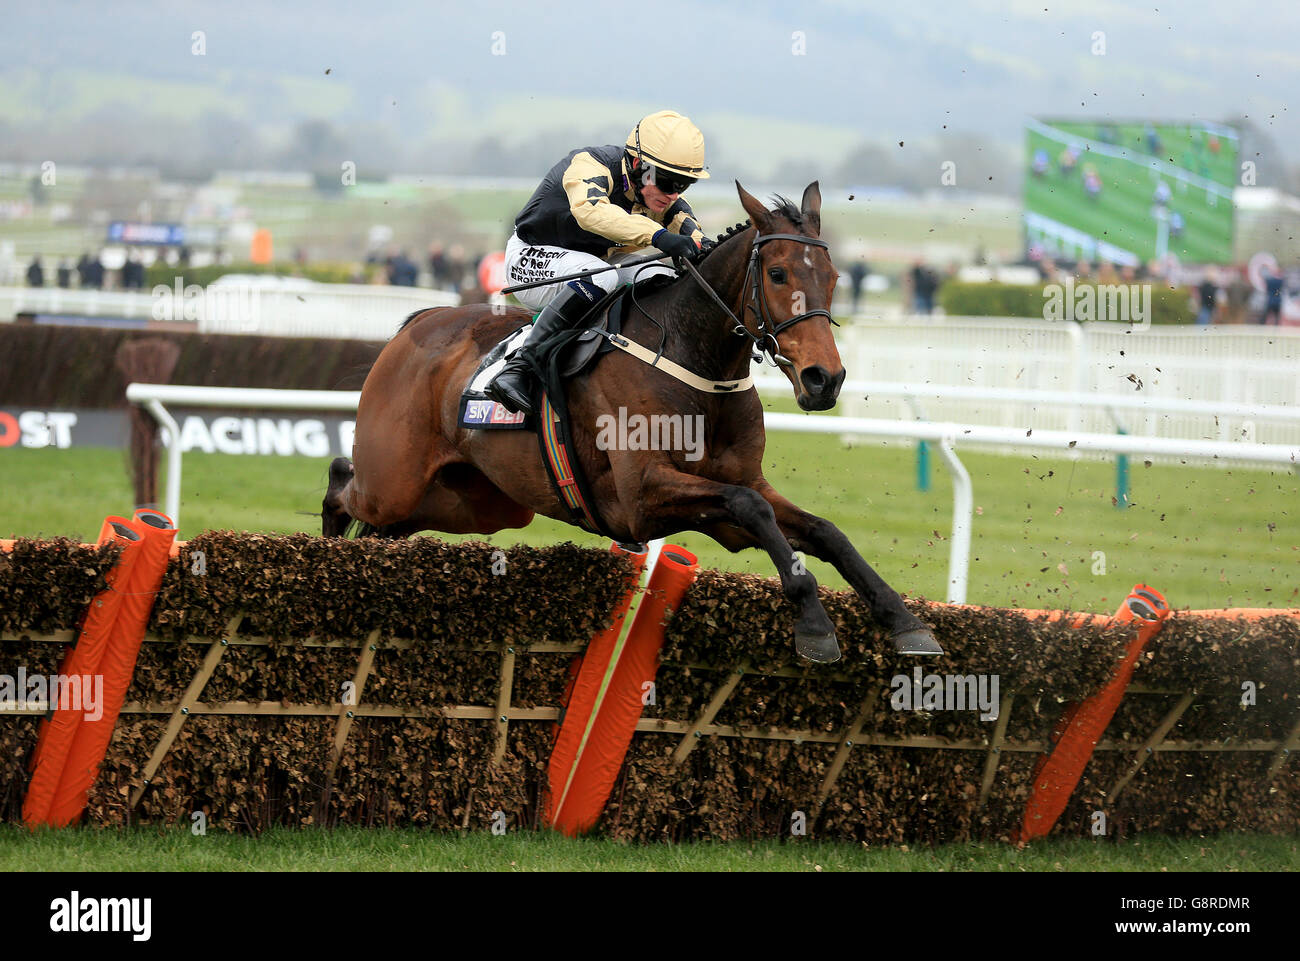 Bellshill ridden by jockey Paul Townend makes a jump in the Sky Bet Supreme Novices' Hurdle Stock Photo